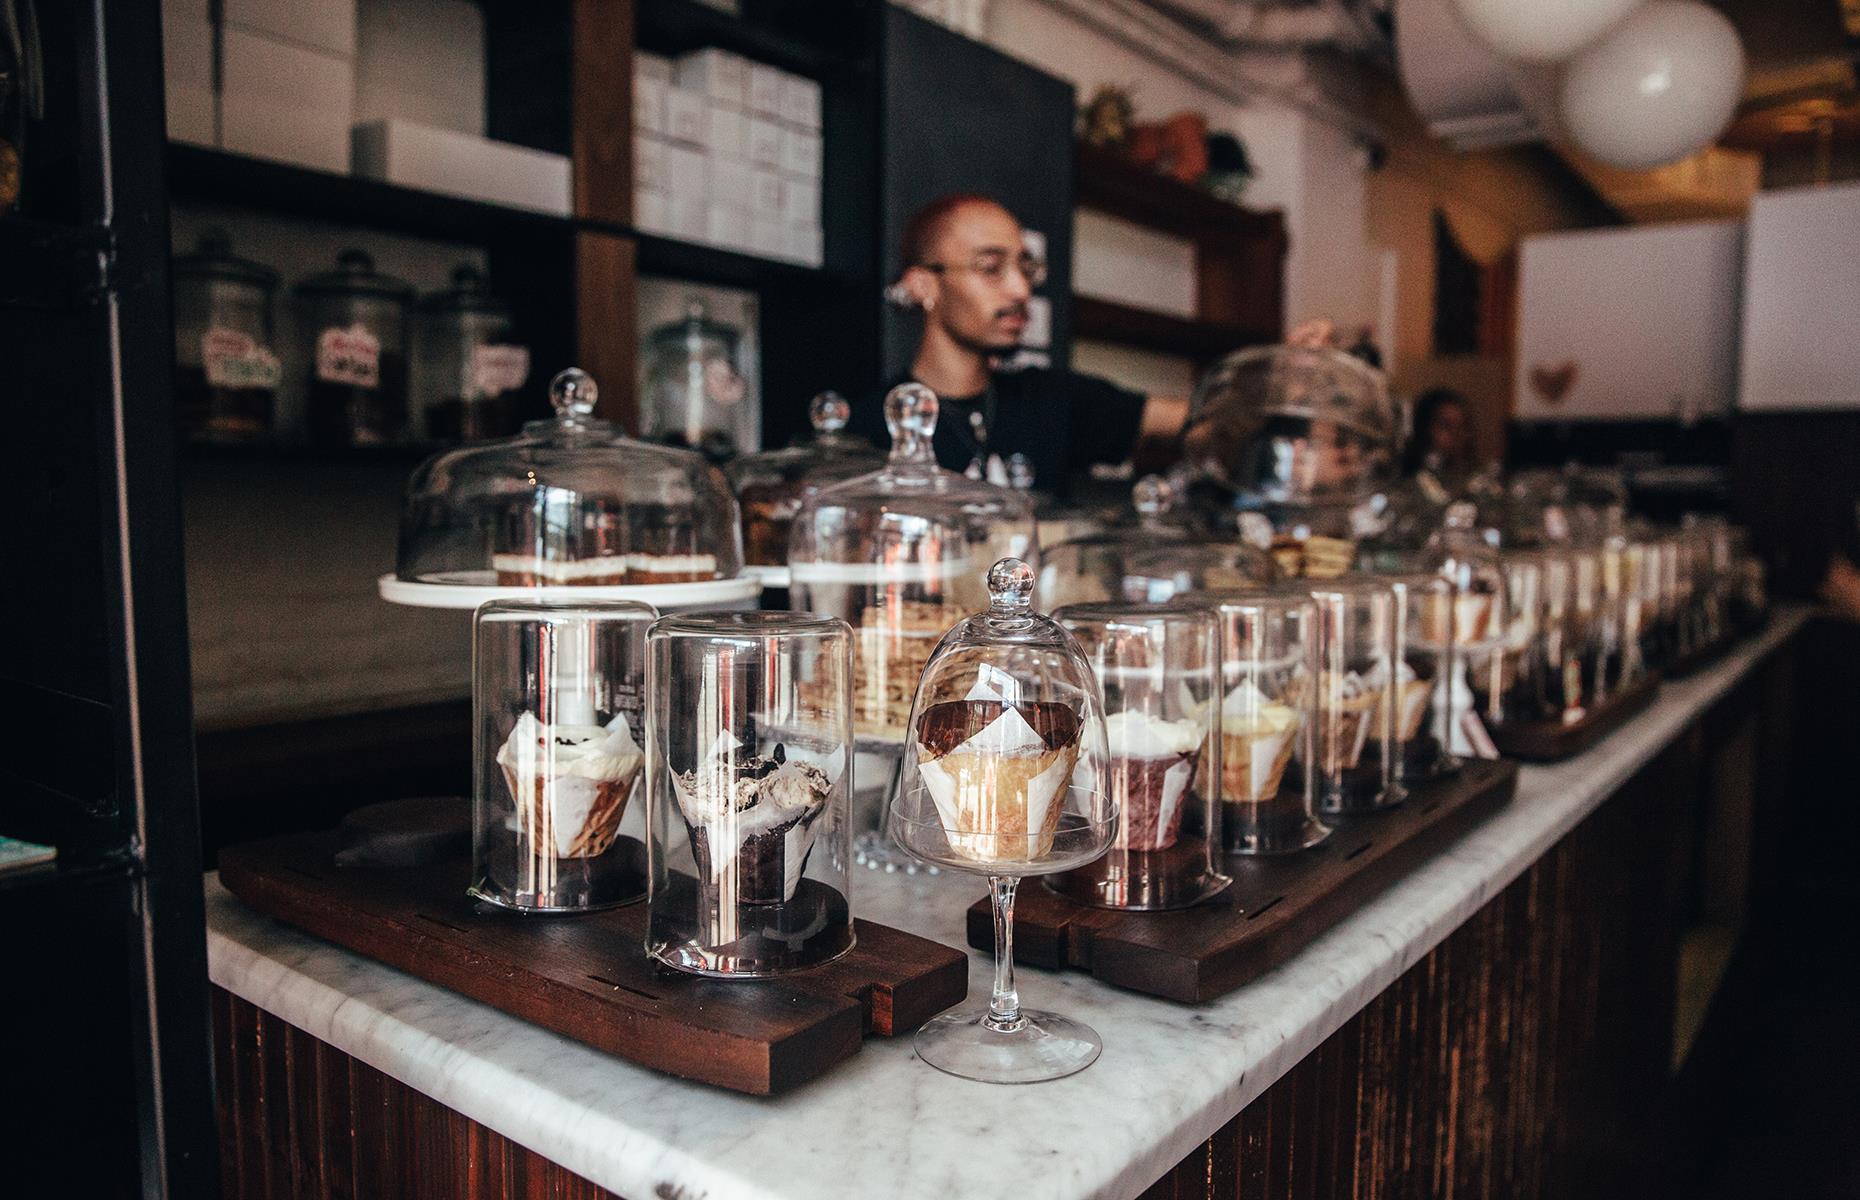 <p>It's almost impossible to choose just one cake in <a href="http://bakedandwired.com/">this bakery in America's capital</a>. From brownies to tray bakes layered with marshmallow, chocolate and caramel, the counter is packed with <a href="https://www.yelp.com/biz/baked-and-wired-washington">tempting treats</a> for humans. There are also plenty of dog treats, though, as this place loves pooches too. Get a box of their Zillabonez, which come in four different flavors, for the dog to snack on while you indulge. </p>